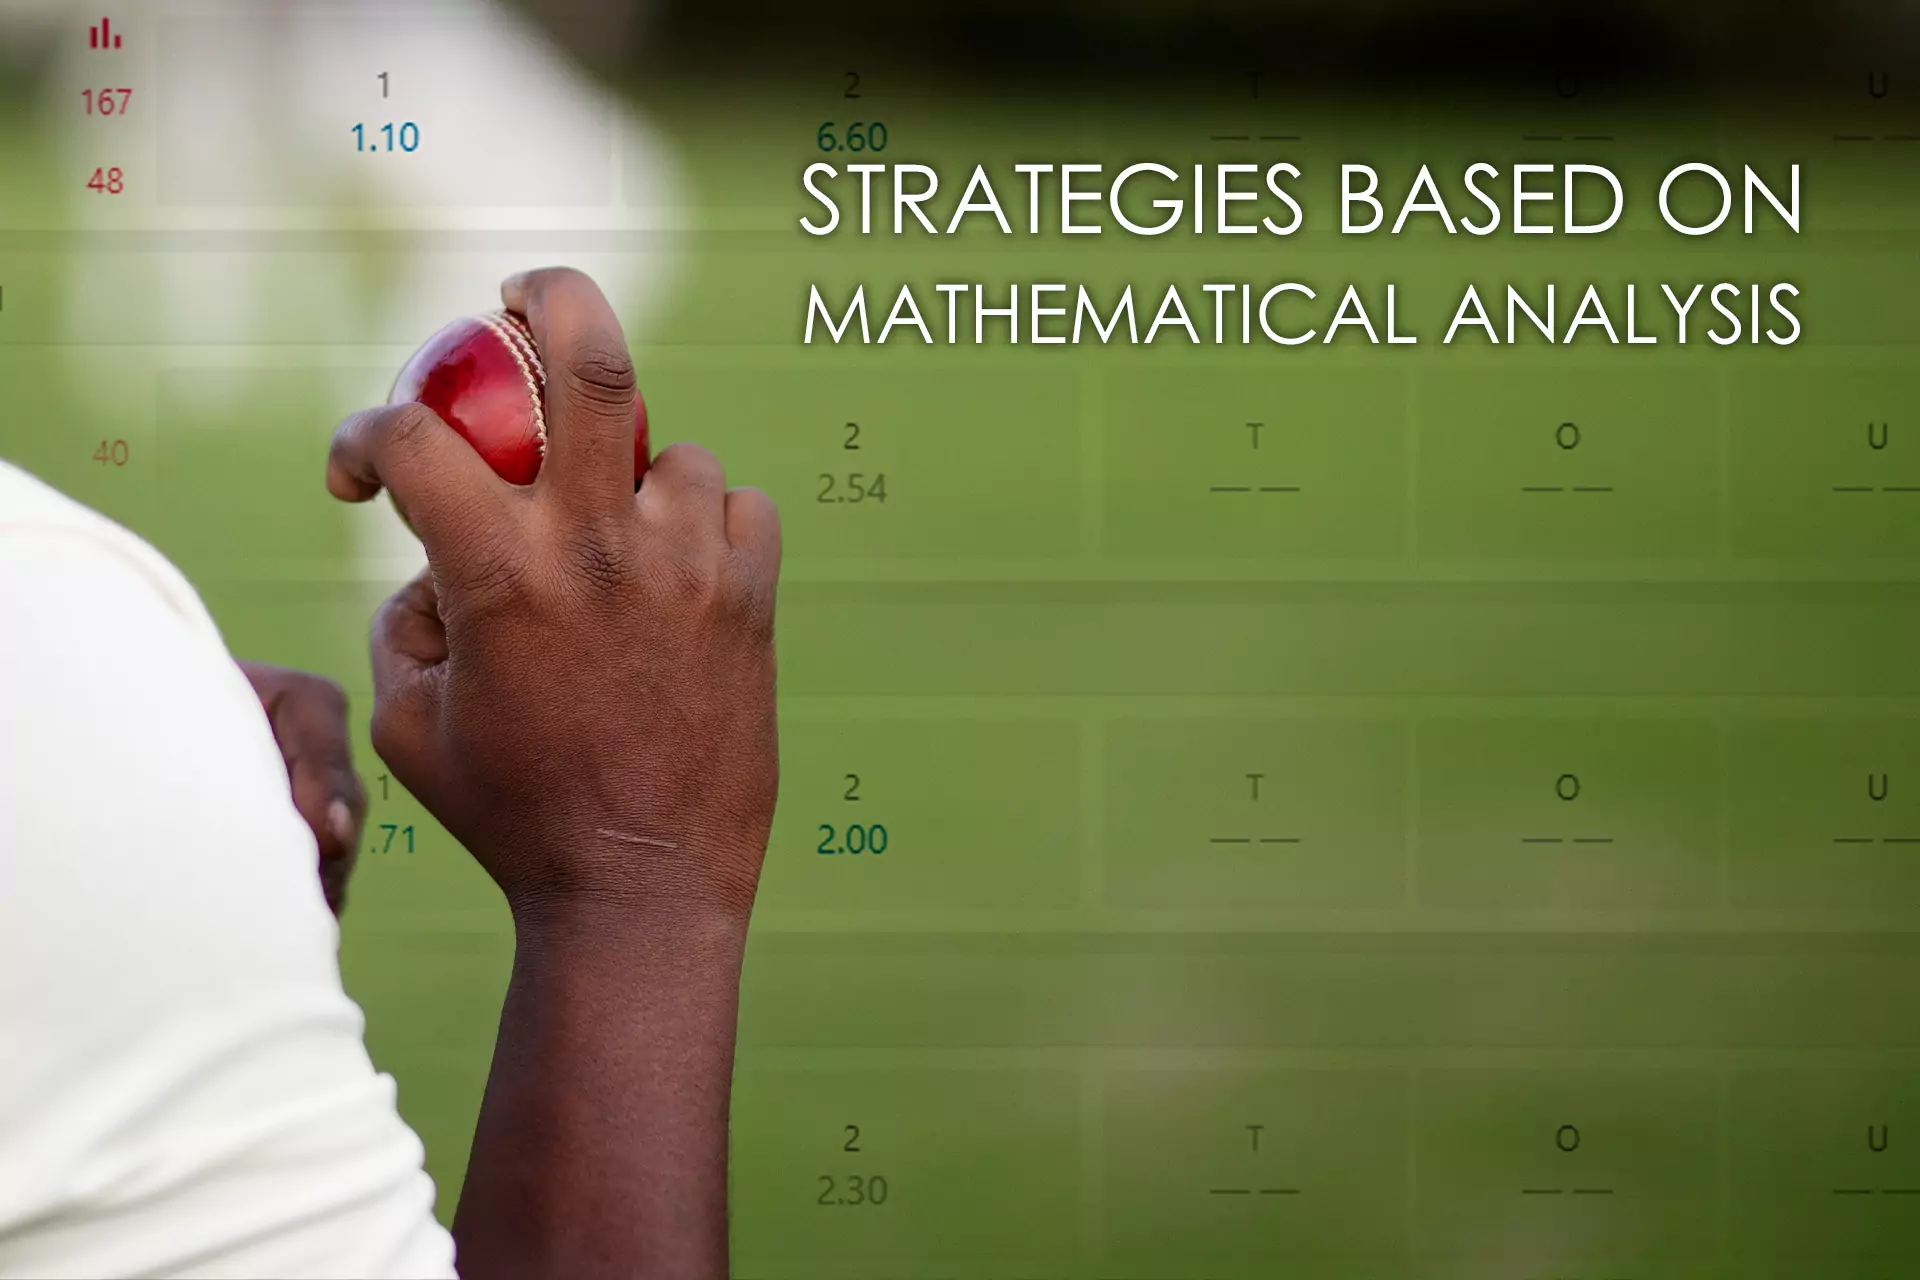 Mathematical analysis helps cricket fans to predict outcomes.